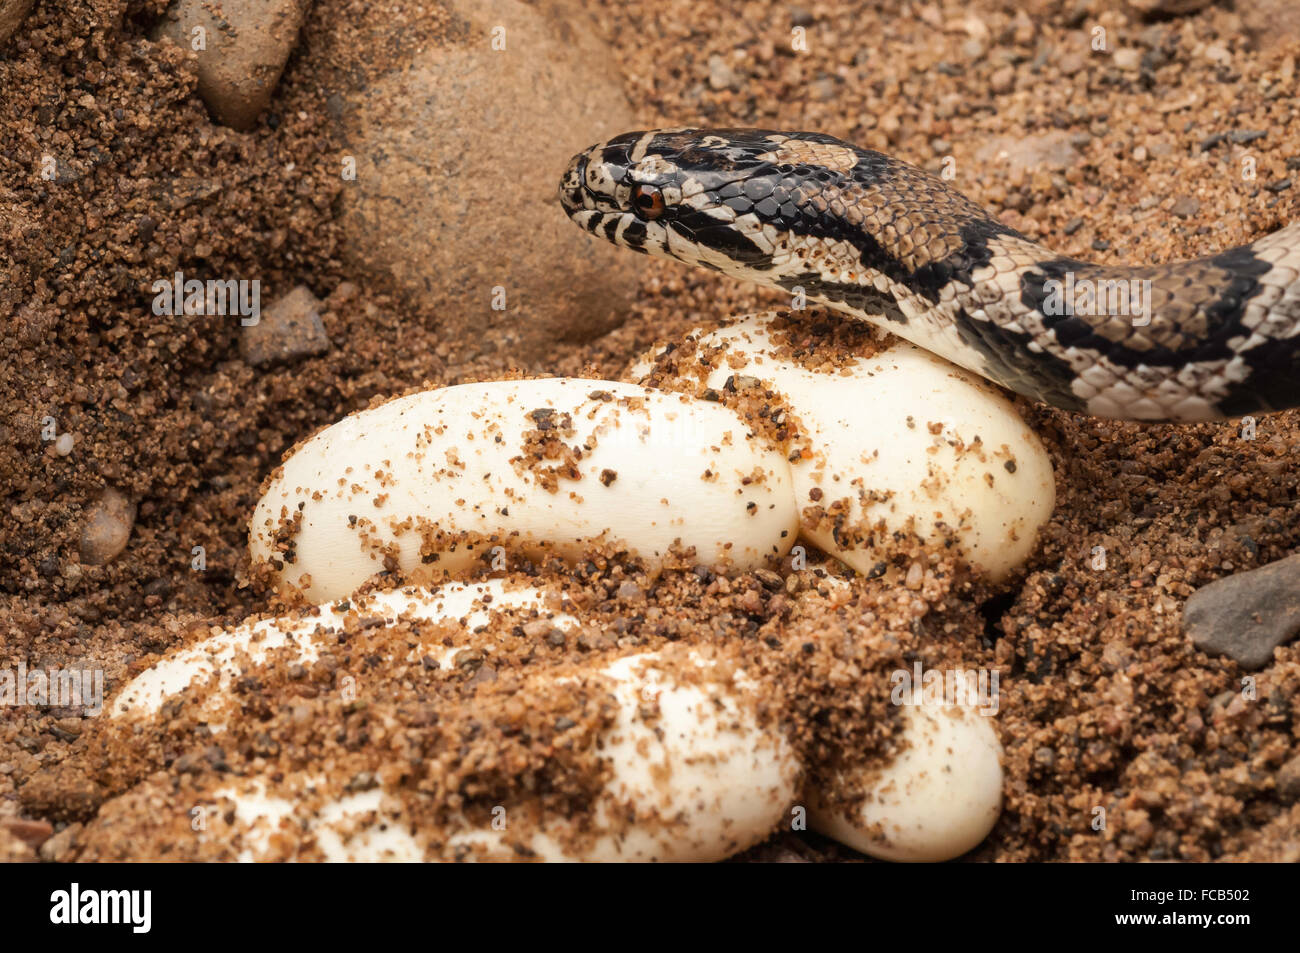 Eastern milk snake, Lampropeltis triangulum triangulum, with eggs, native to the United States, Mexico, south to Latin America Stock Photo